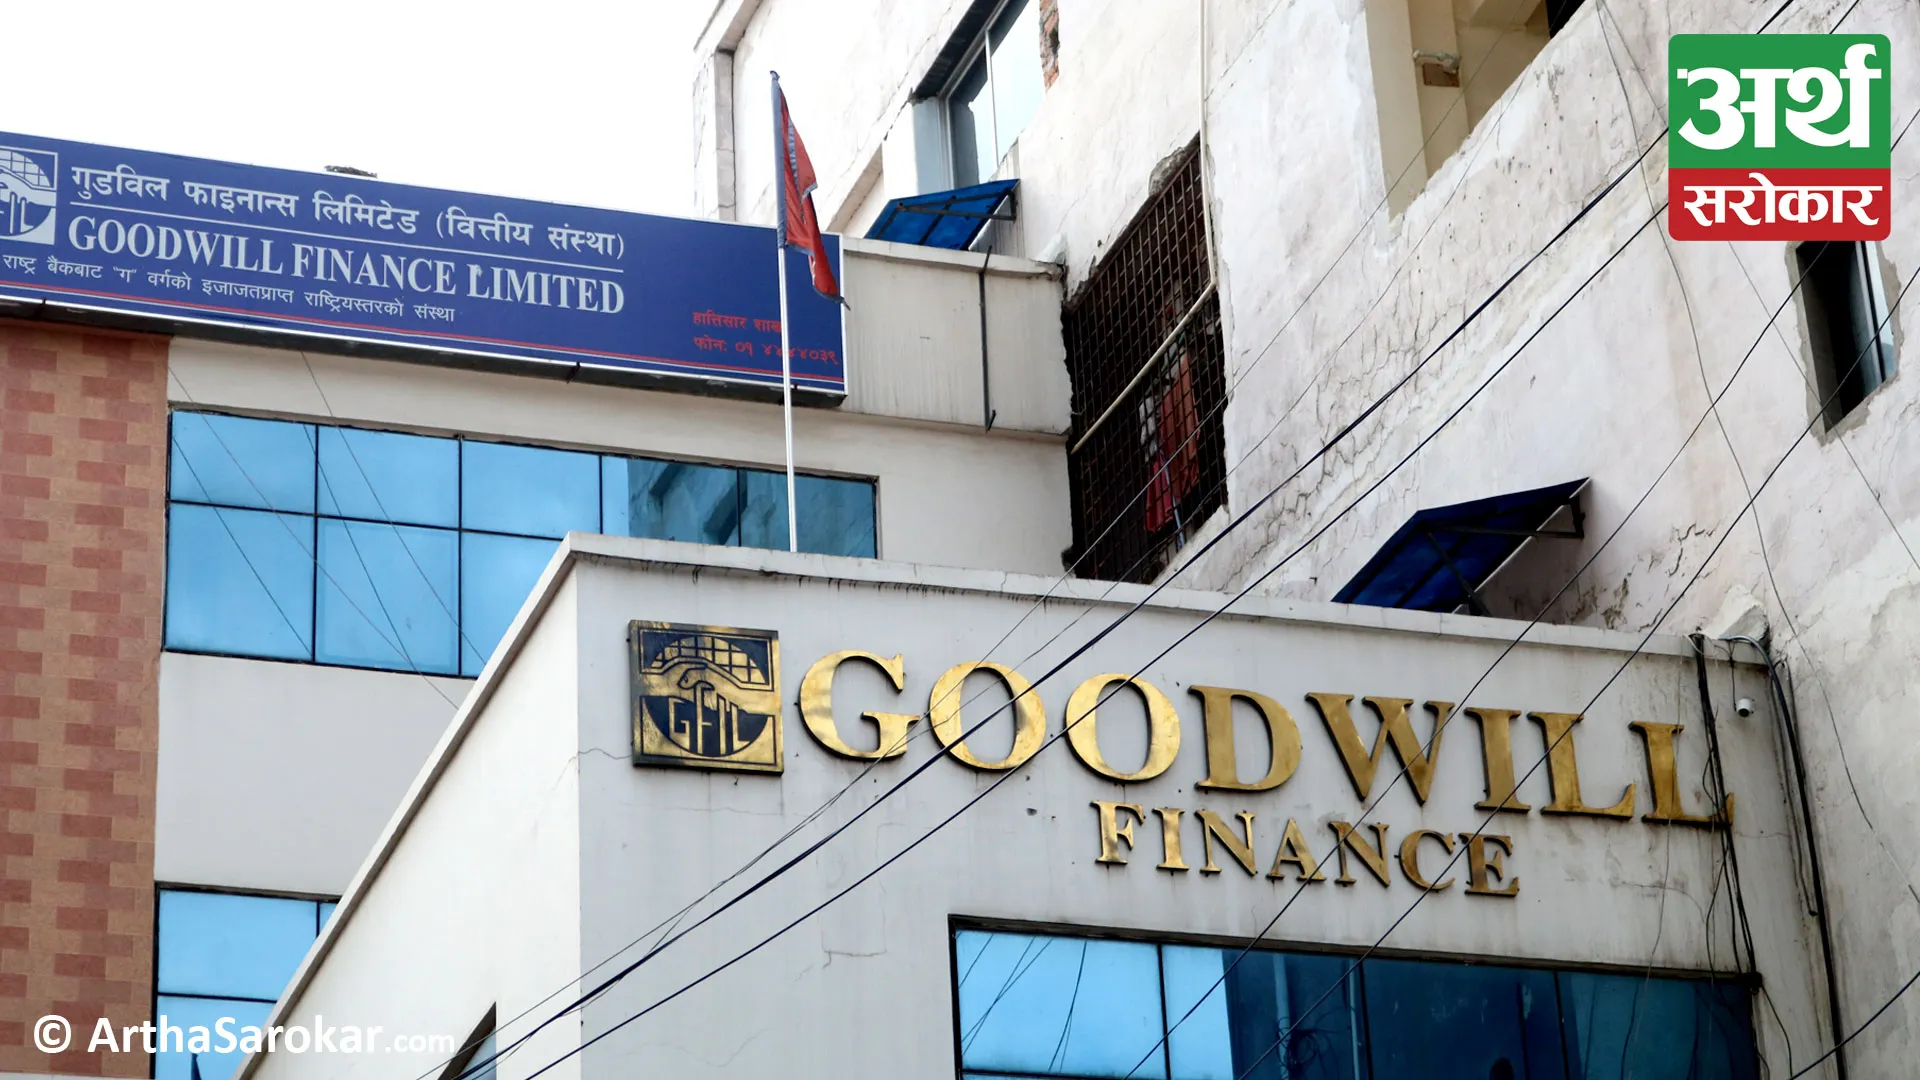 Goodwill finance won’t distribute dividend this year